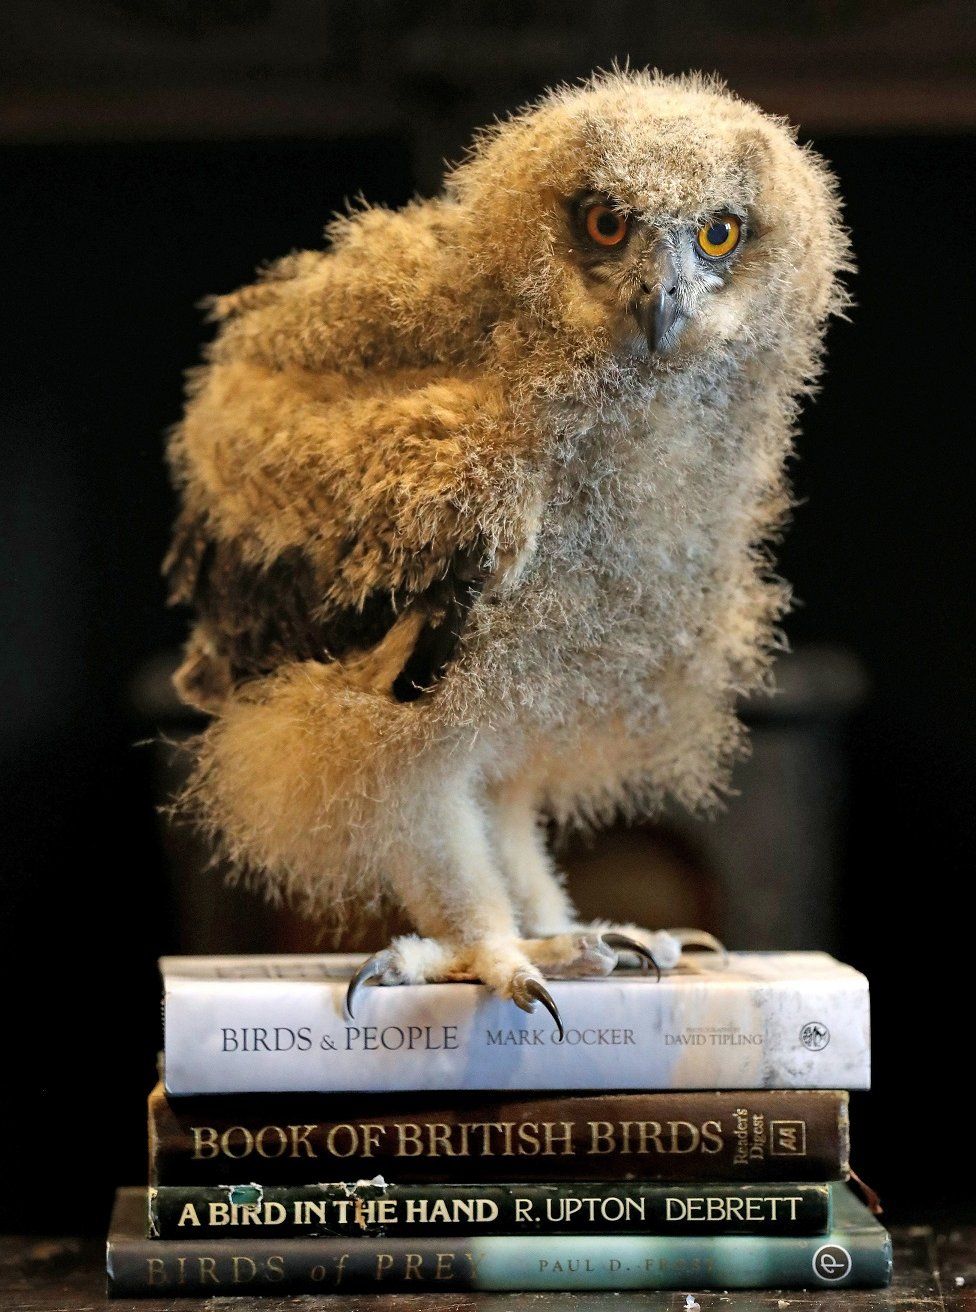 Benedict the owl on a pile of books